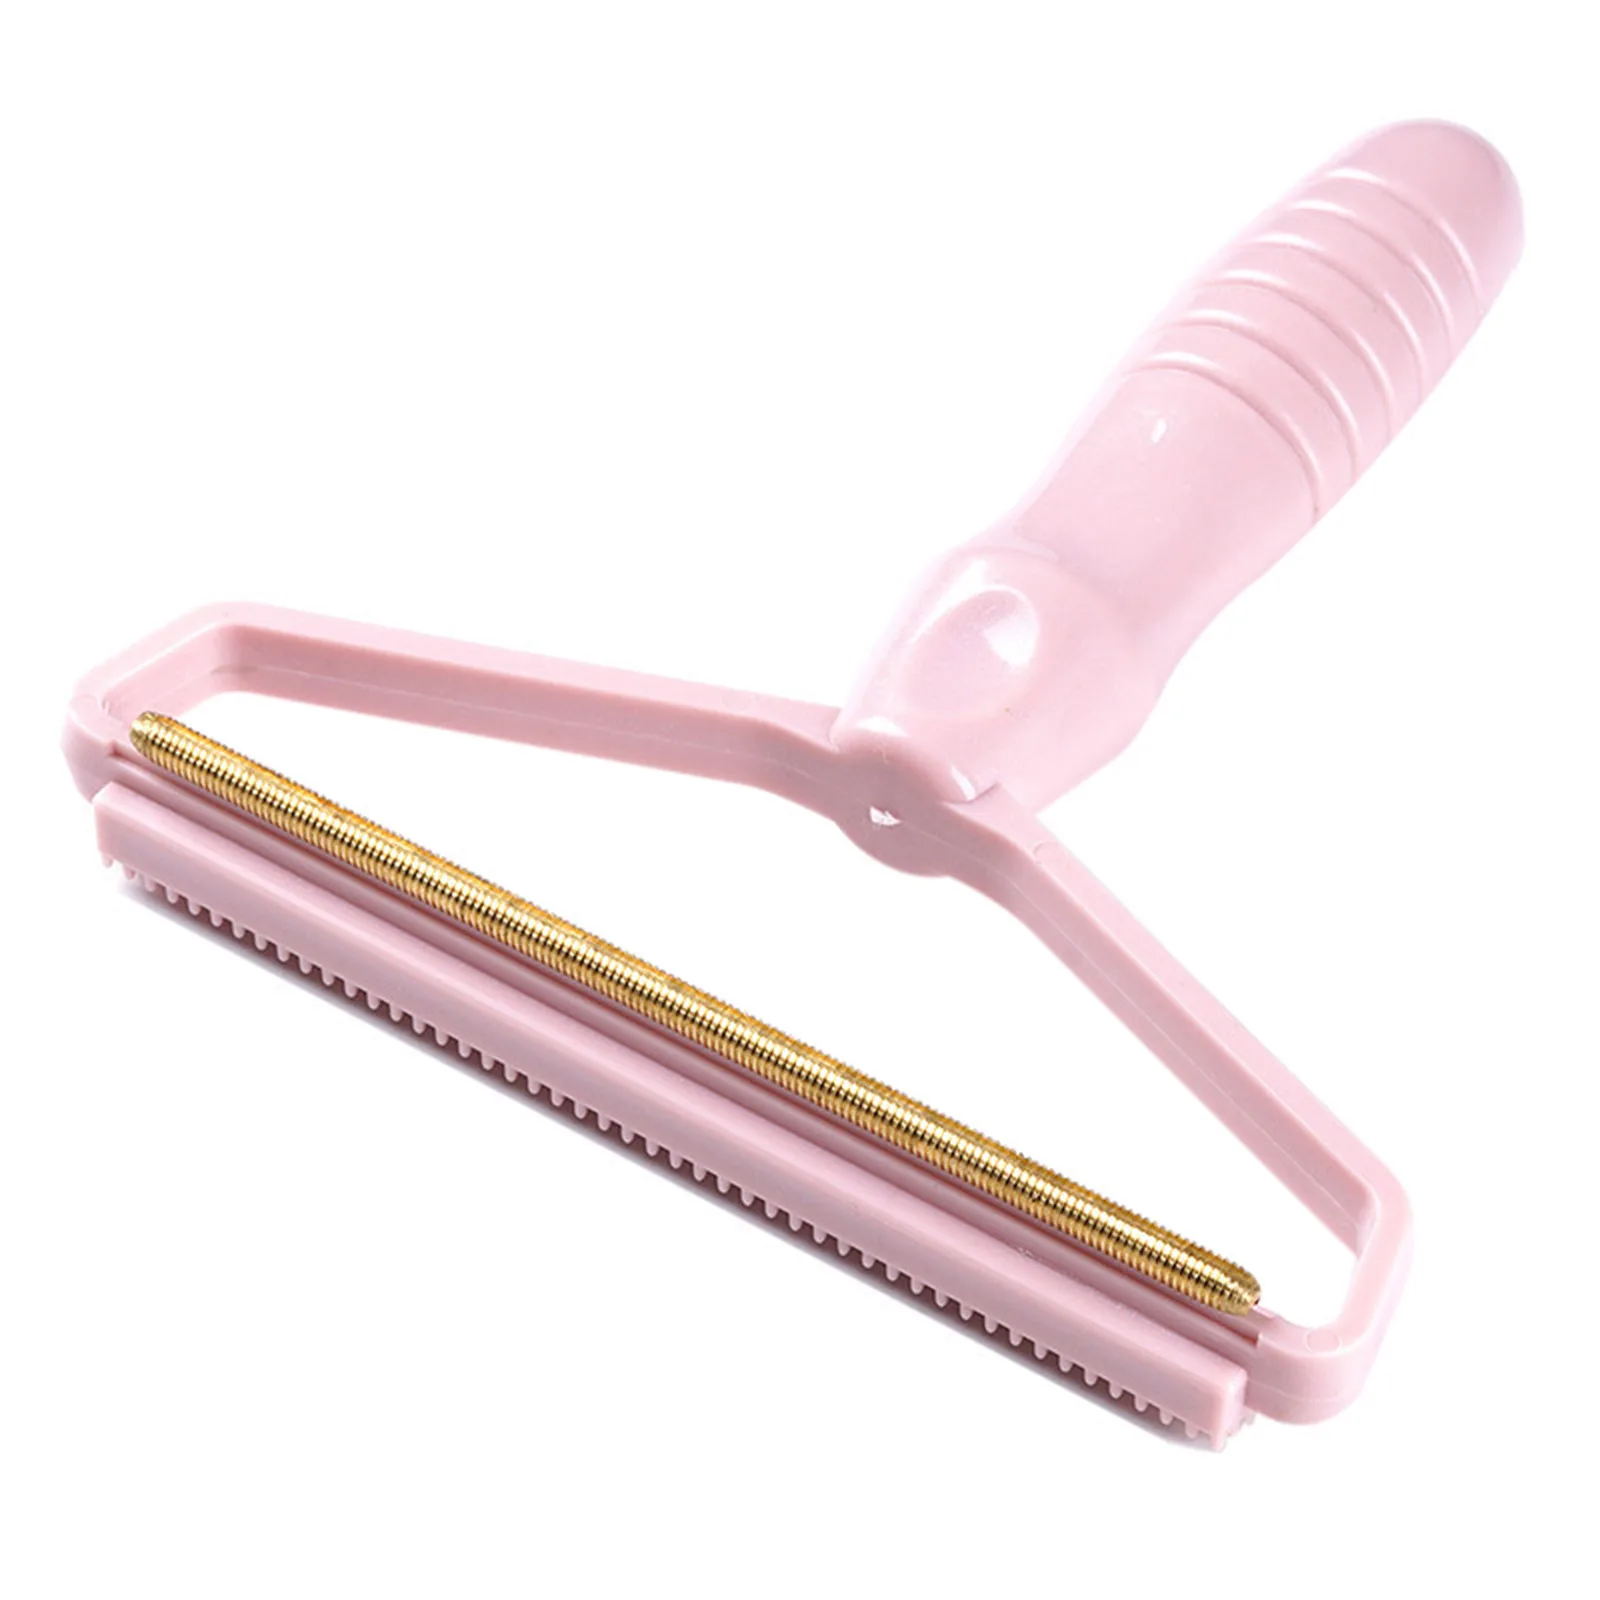 Portable Manual Epilator Durable Copper Brush Head Peeler For Plush Clothes Cotton Jackets Cleaning Tool